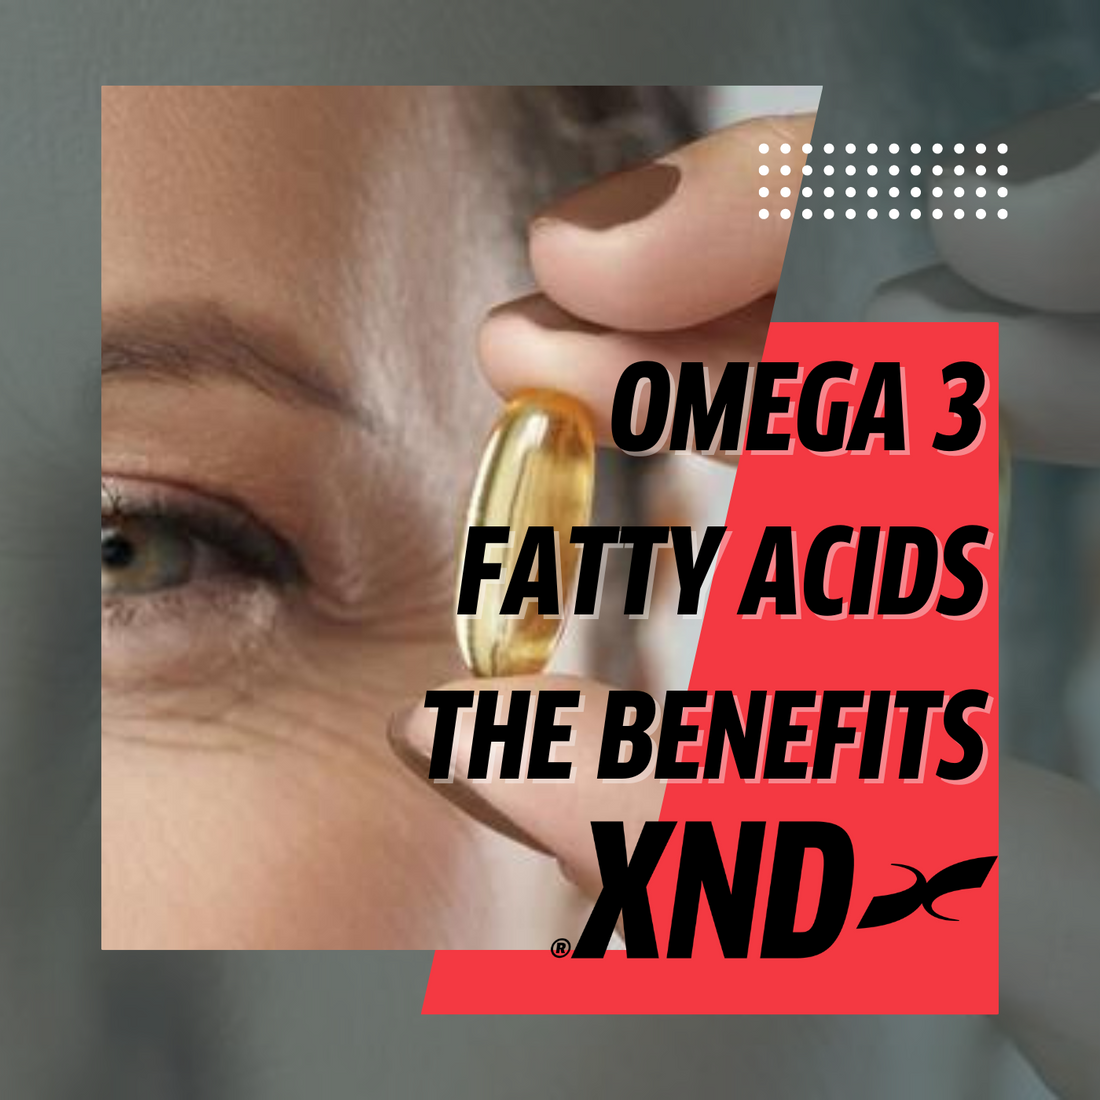 Omega 3 Fatty Acids what are the benefits?